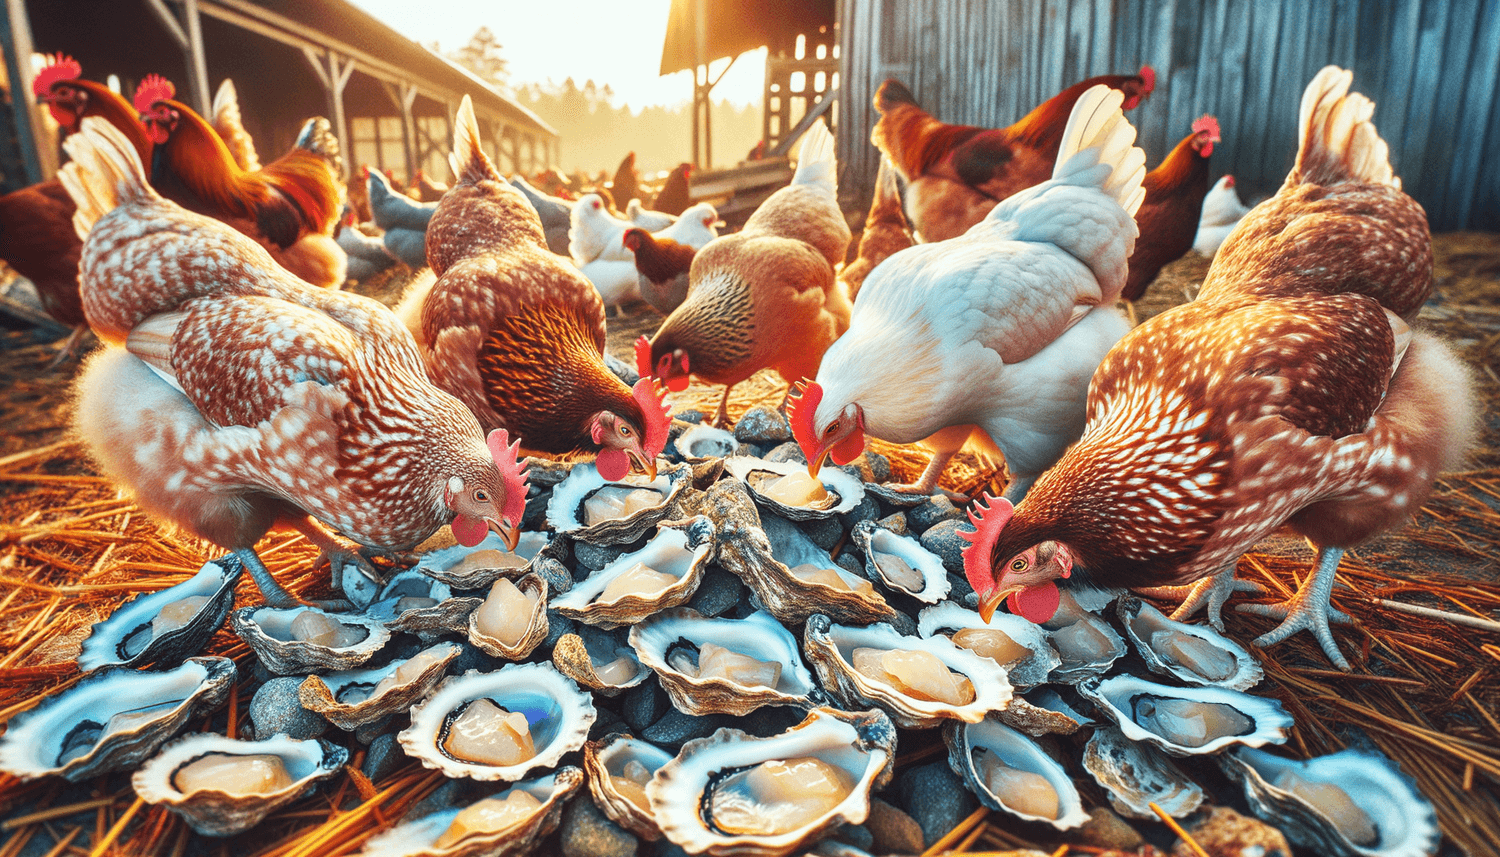 Can Chickens Eat Too Much Oyster Shell?